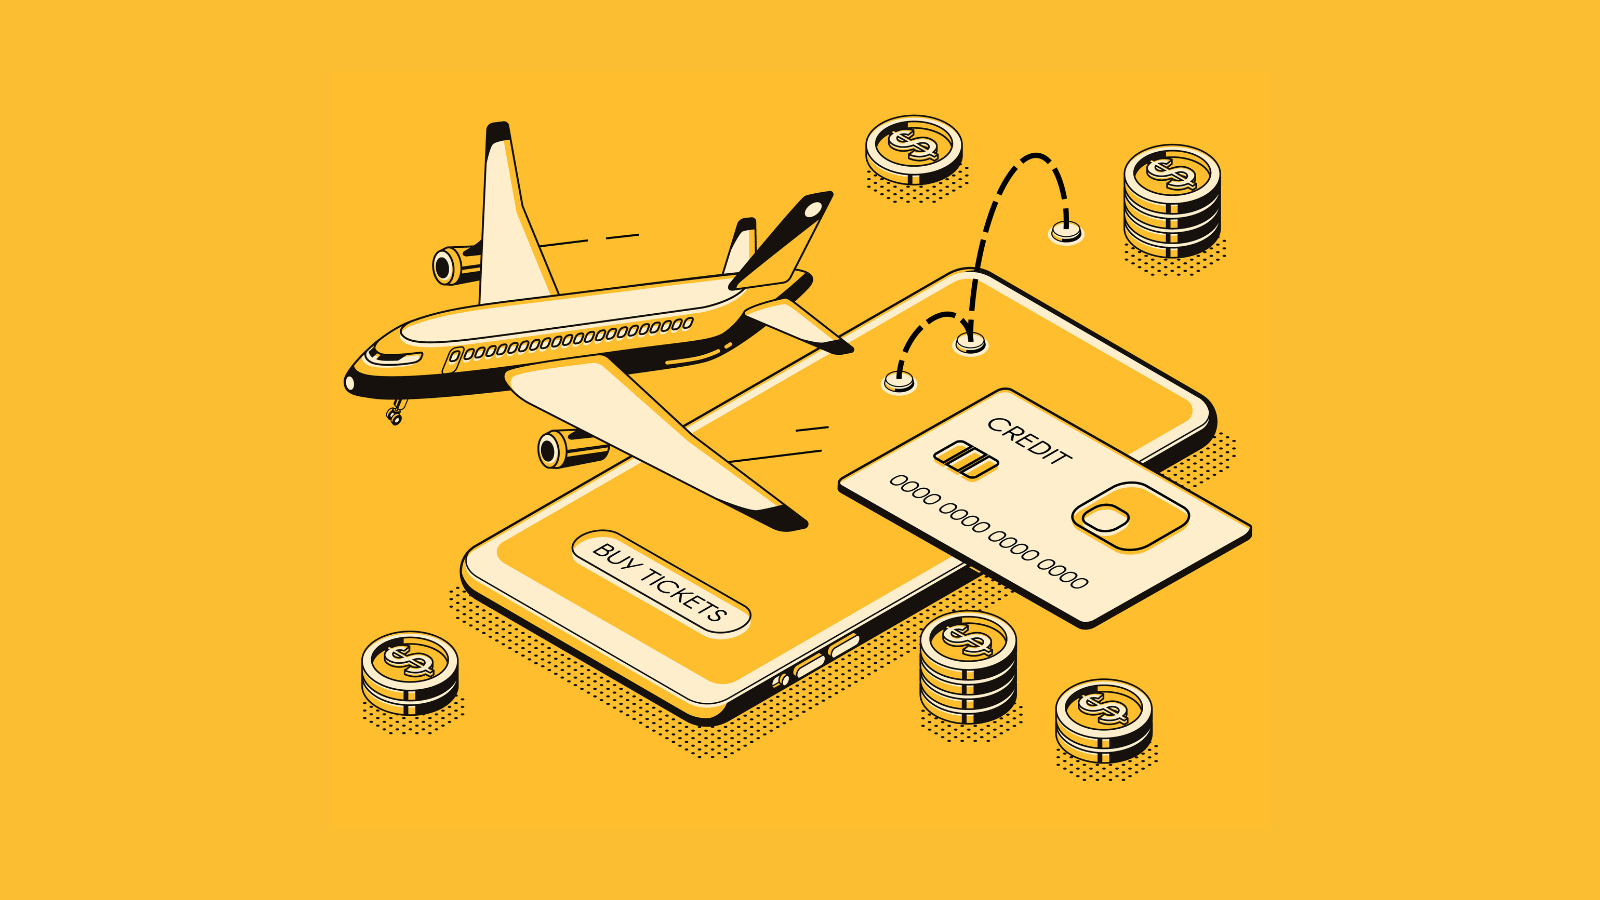 Airline ticketing